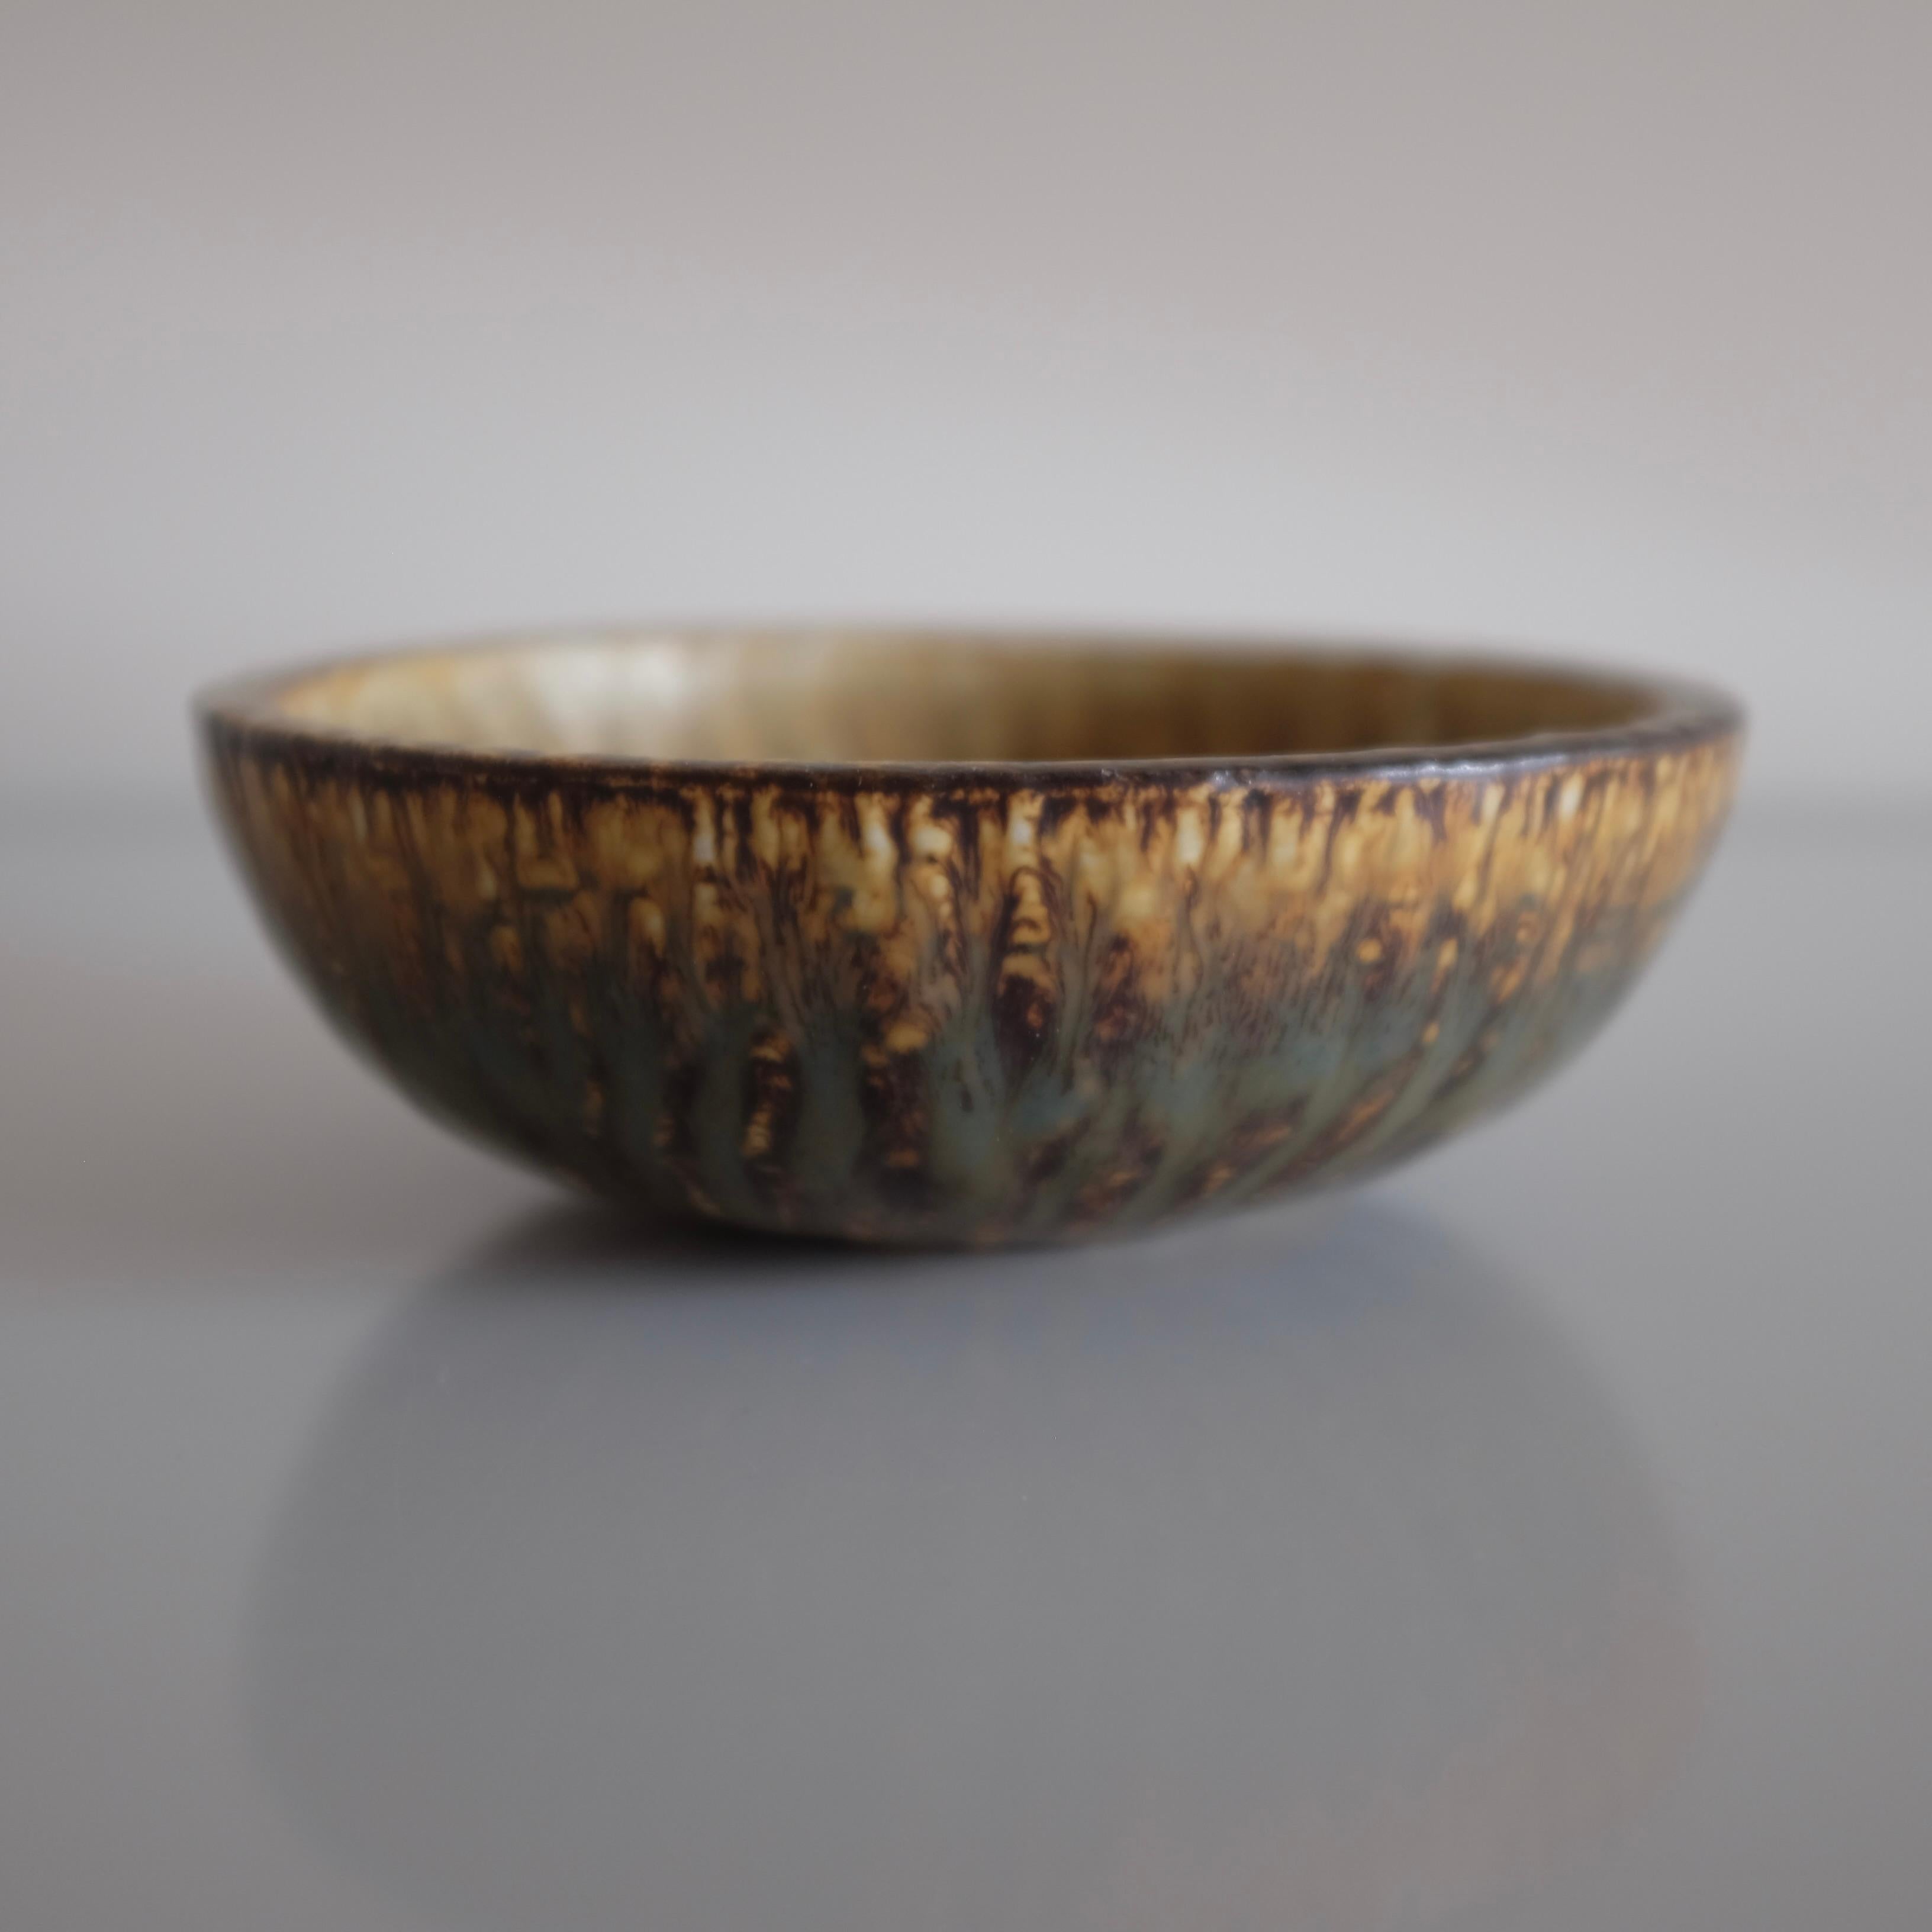 Small ceramic bowl from the Rubus collection by Gunnar Nylund for Rörstrand, Sweden. Decorative flame like design in brown, black and beige colors with designers signature underneath. In a good vintage condition. 
Dimensions: D 6.75 in. x H 2.25 in
